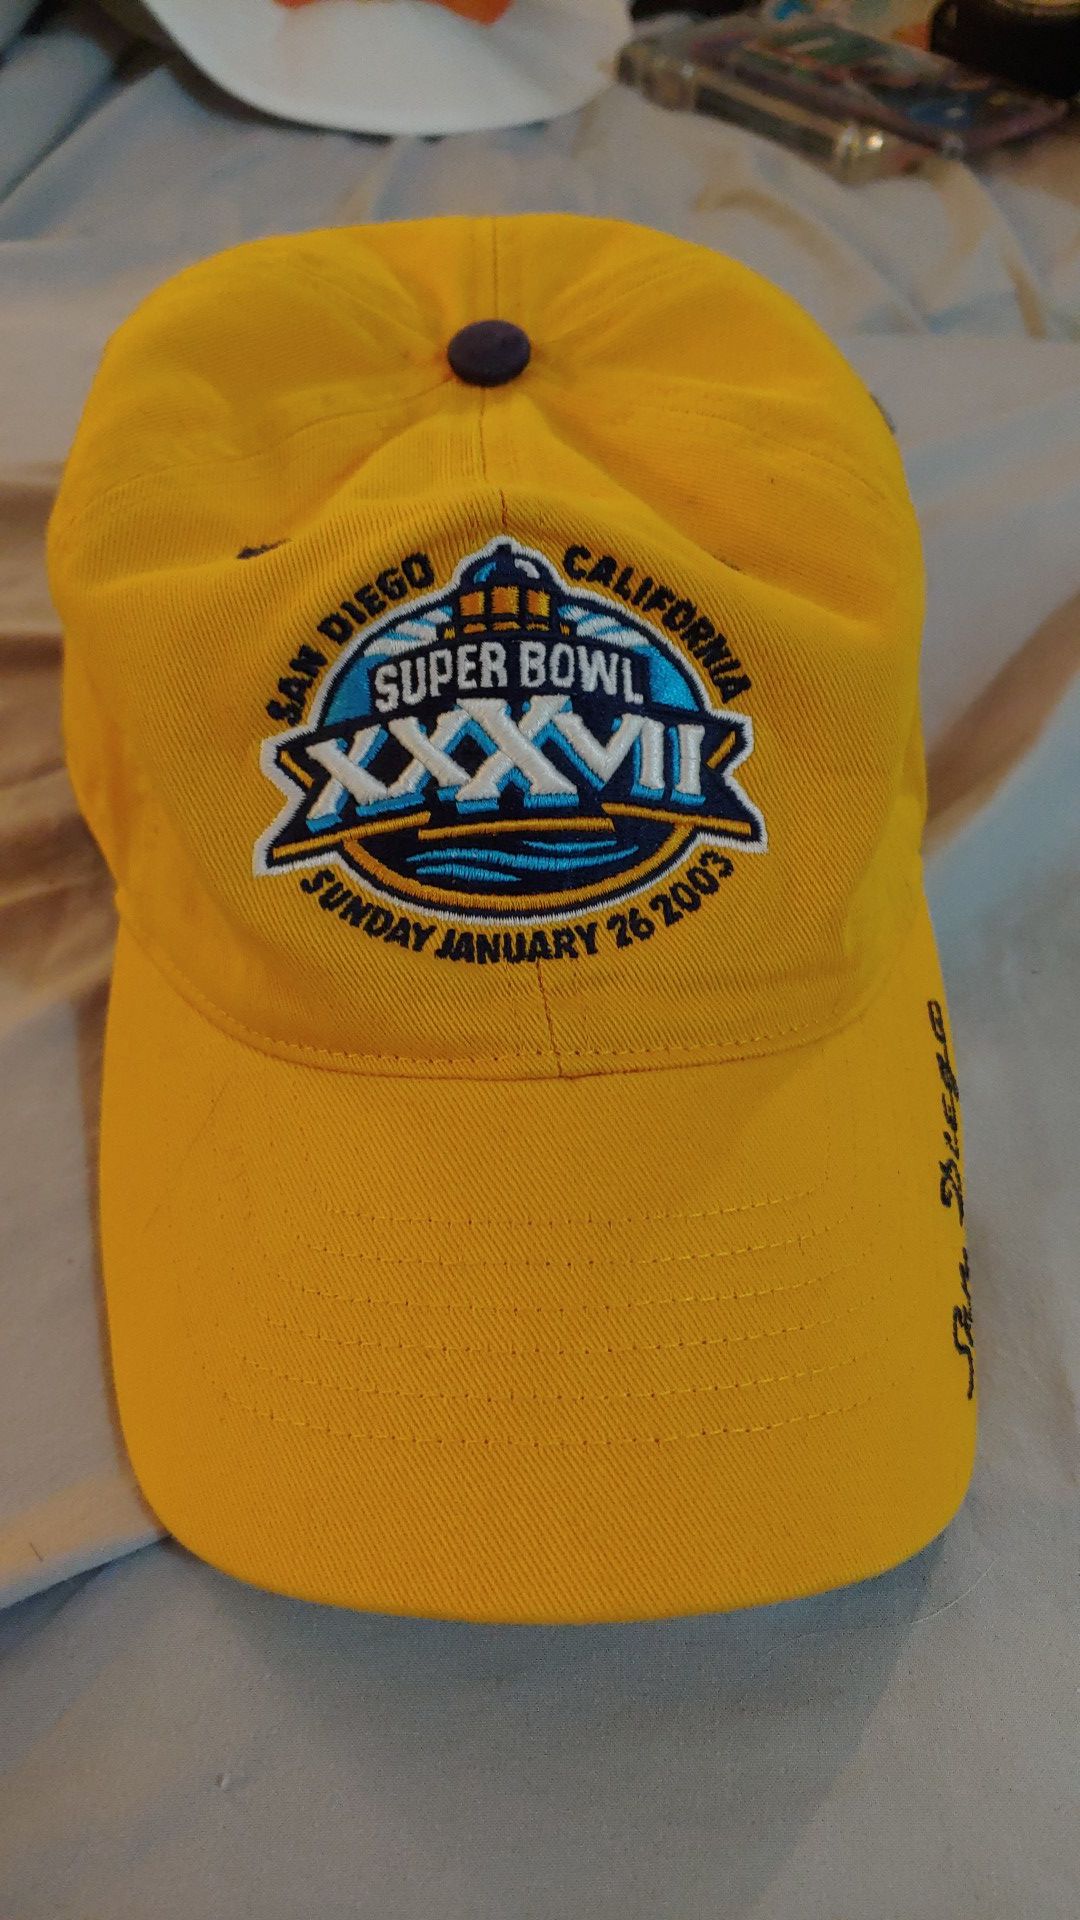 Brand new hat bought at Super Bowl 42 game in San Diego